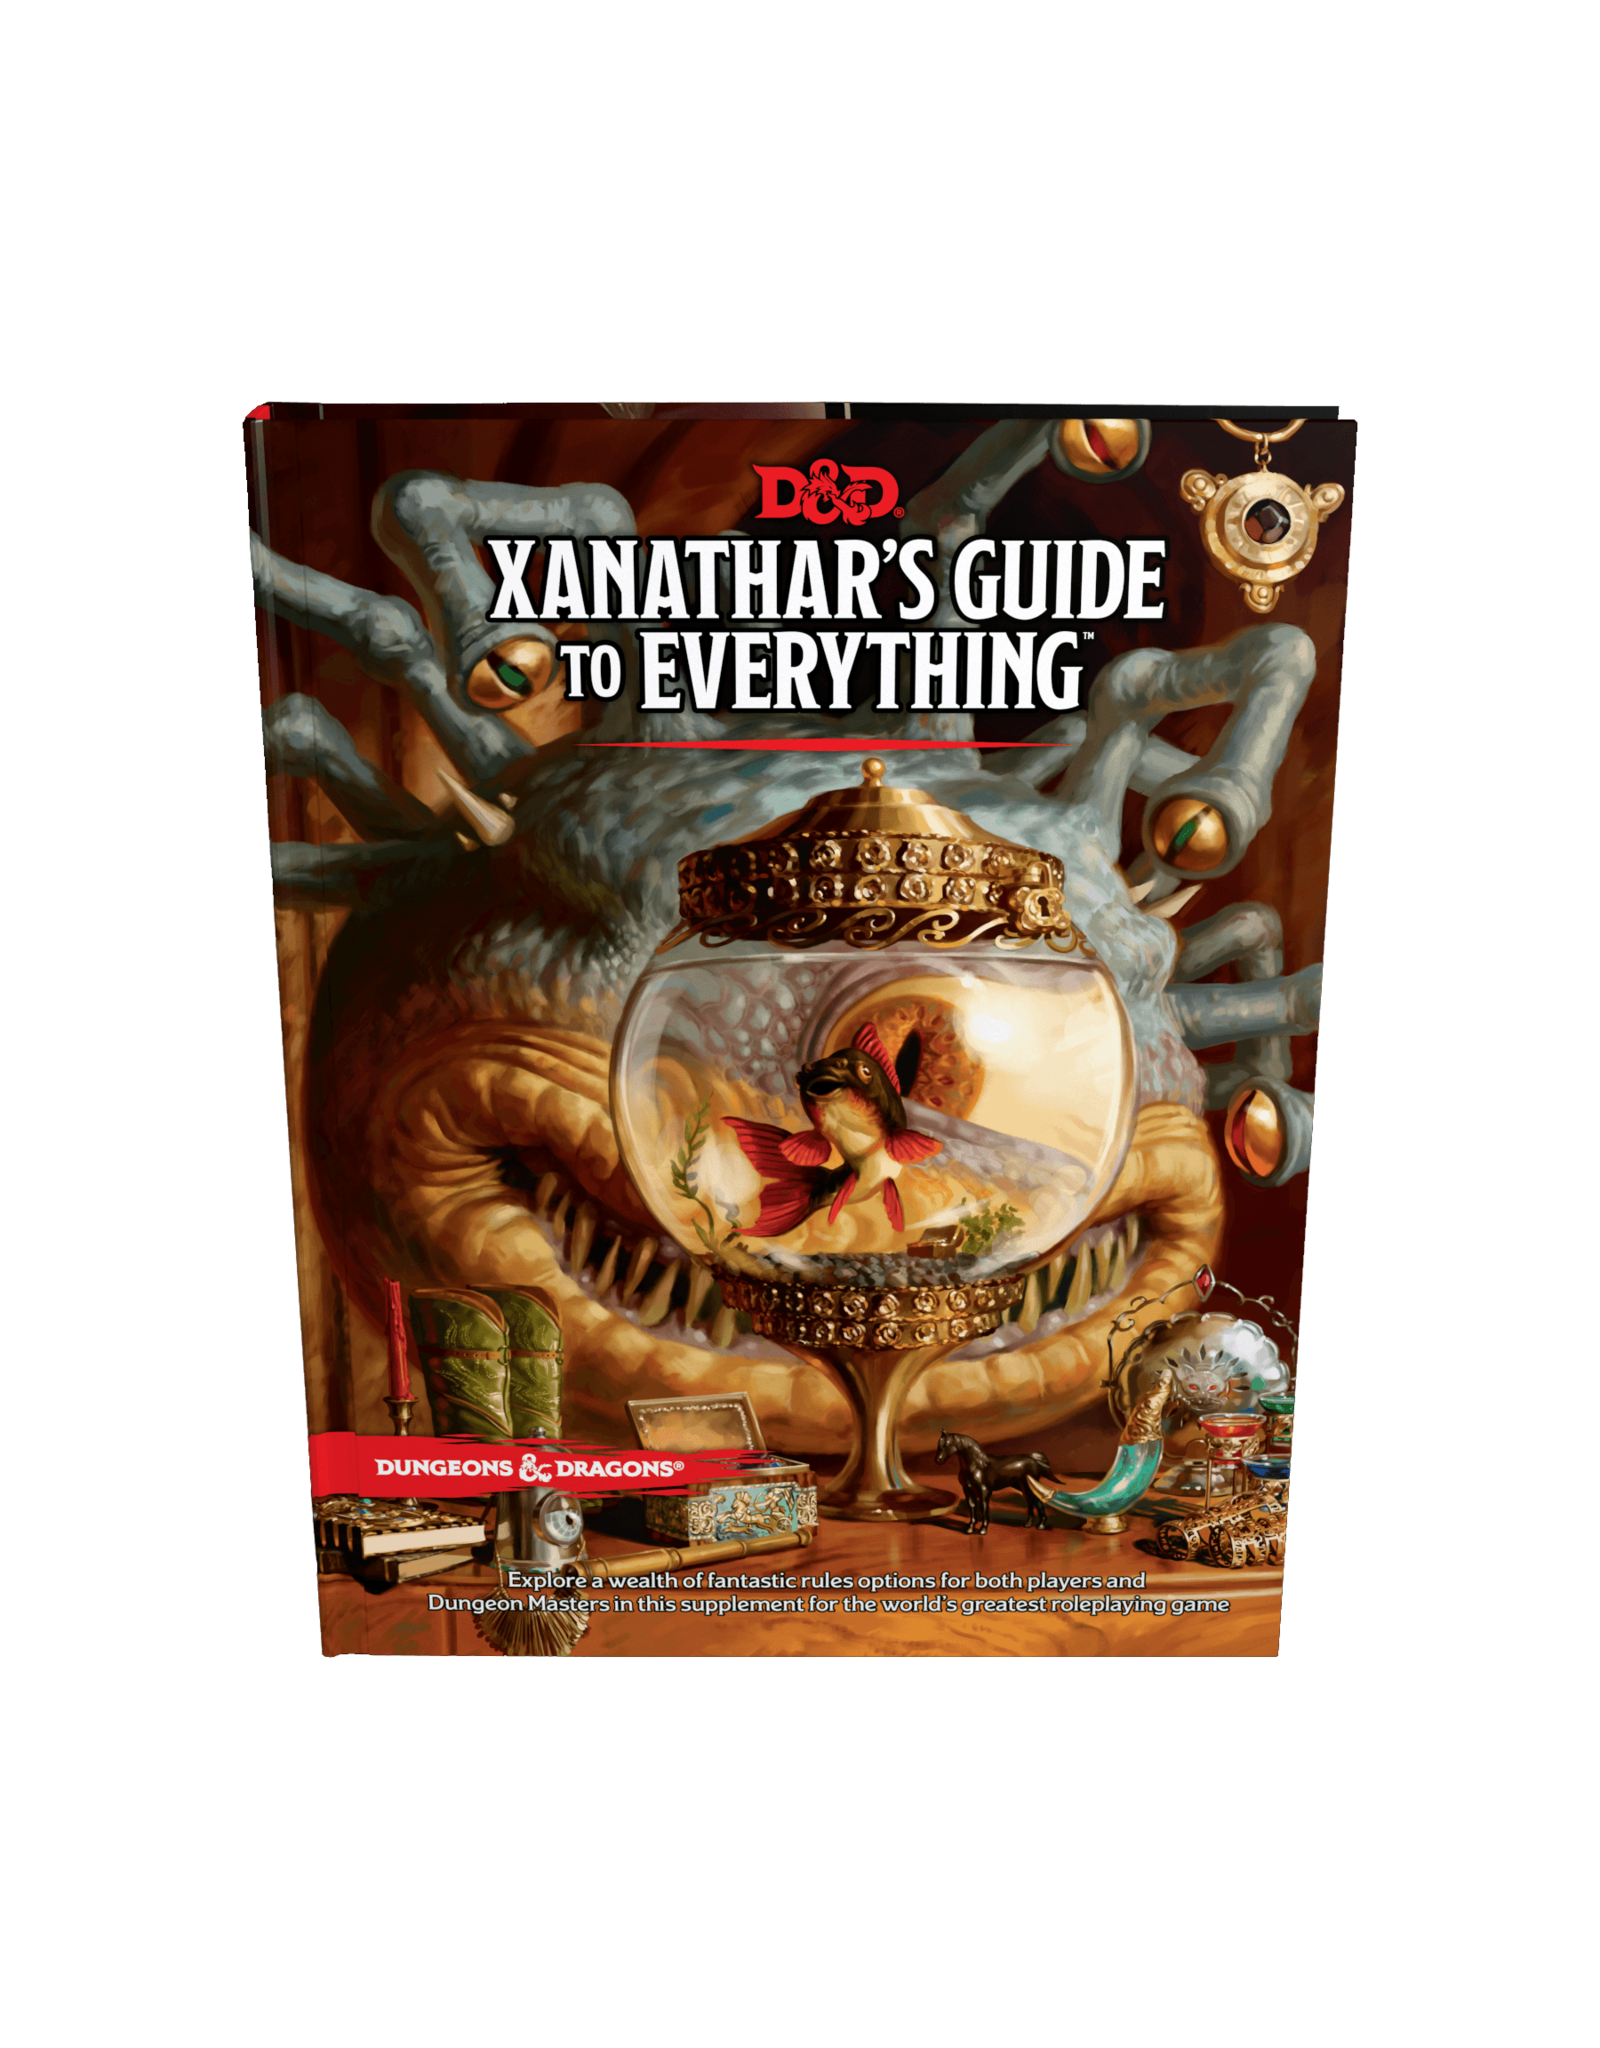 Xanathars Guide to Everything